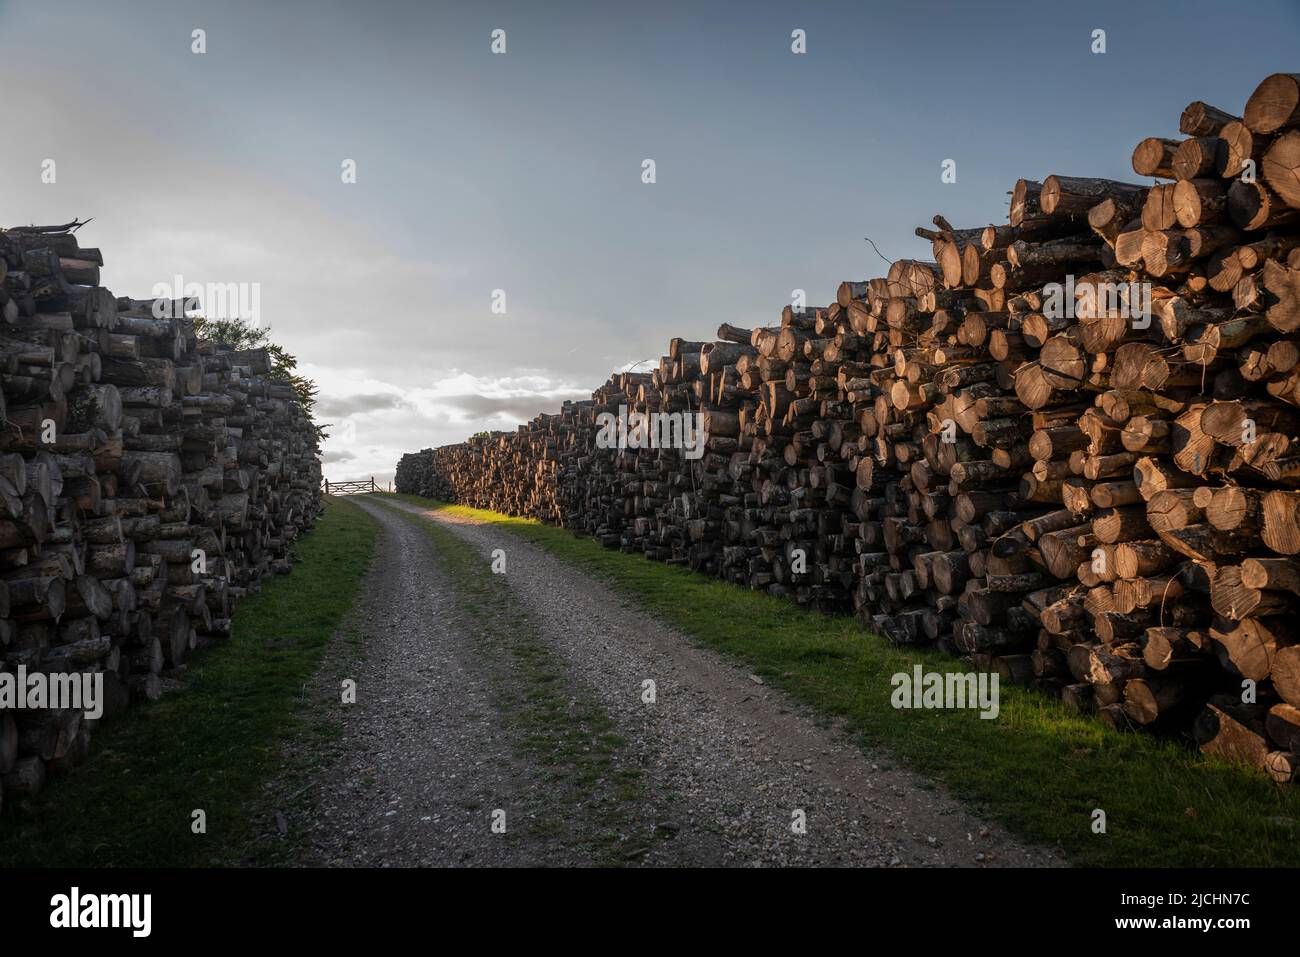 Canyon of timber logs on the Arundel Estate, West Sussex, UK Stock Photo